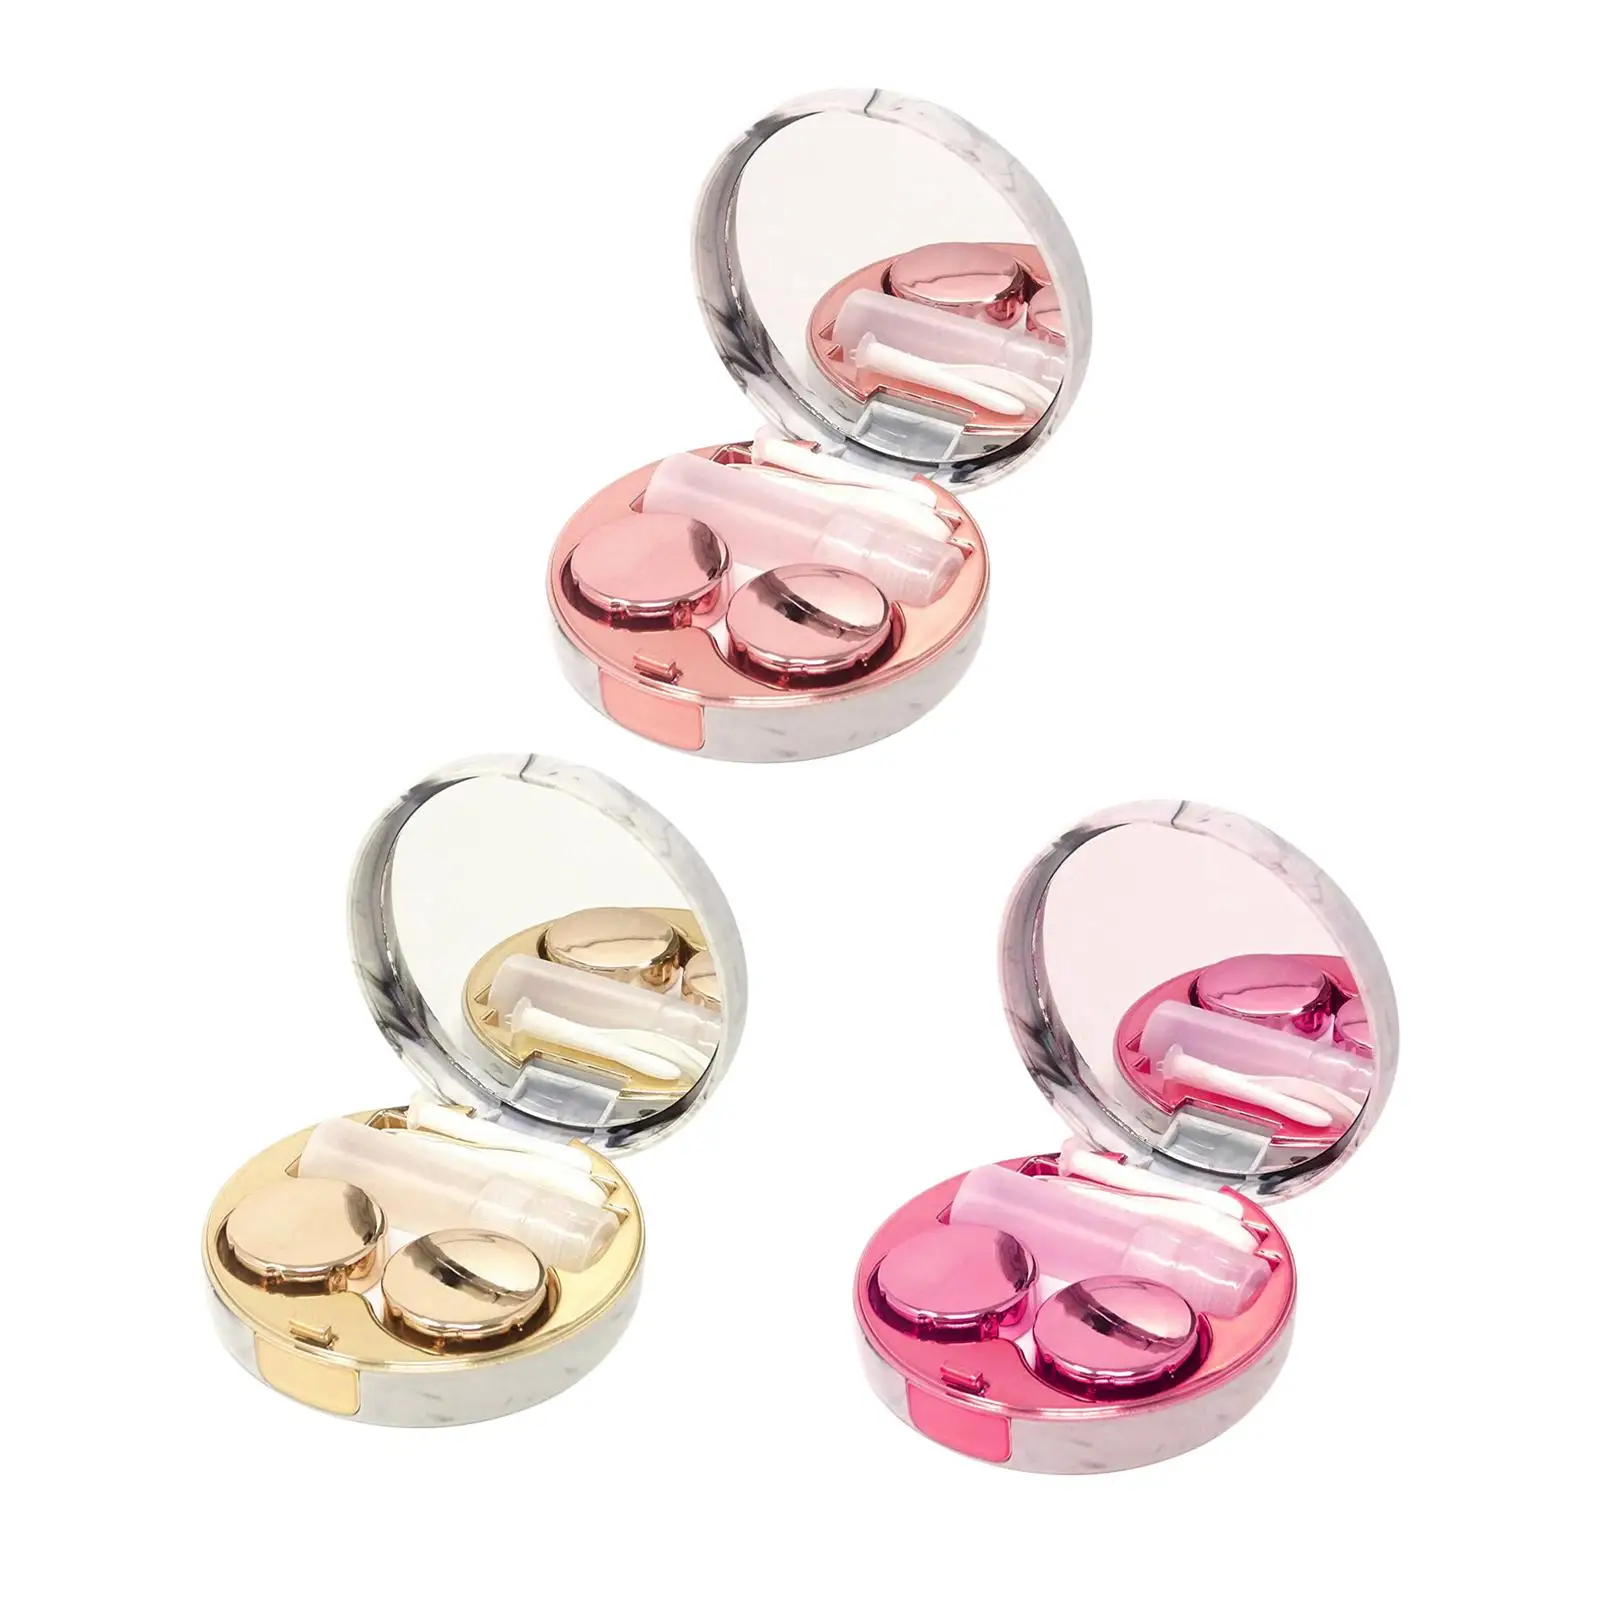 Mini Contact Lens case Lens Care Reusable Durable Holder Soaking Storage Container with Mirror Remover Tool Tweezers Stick